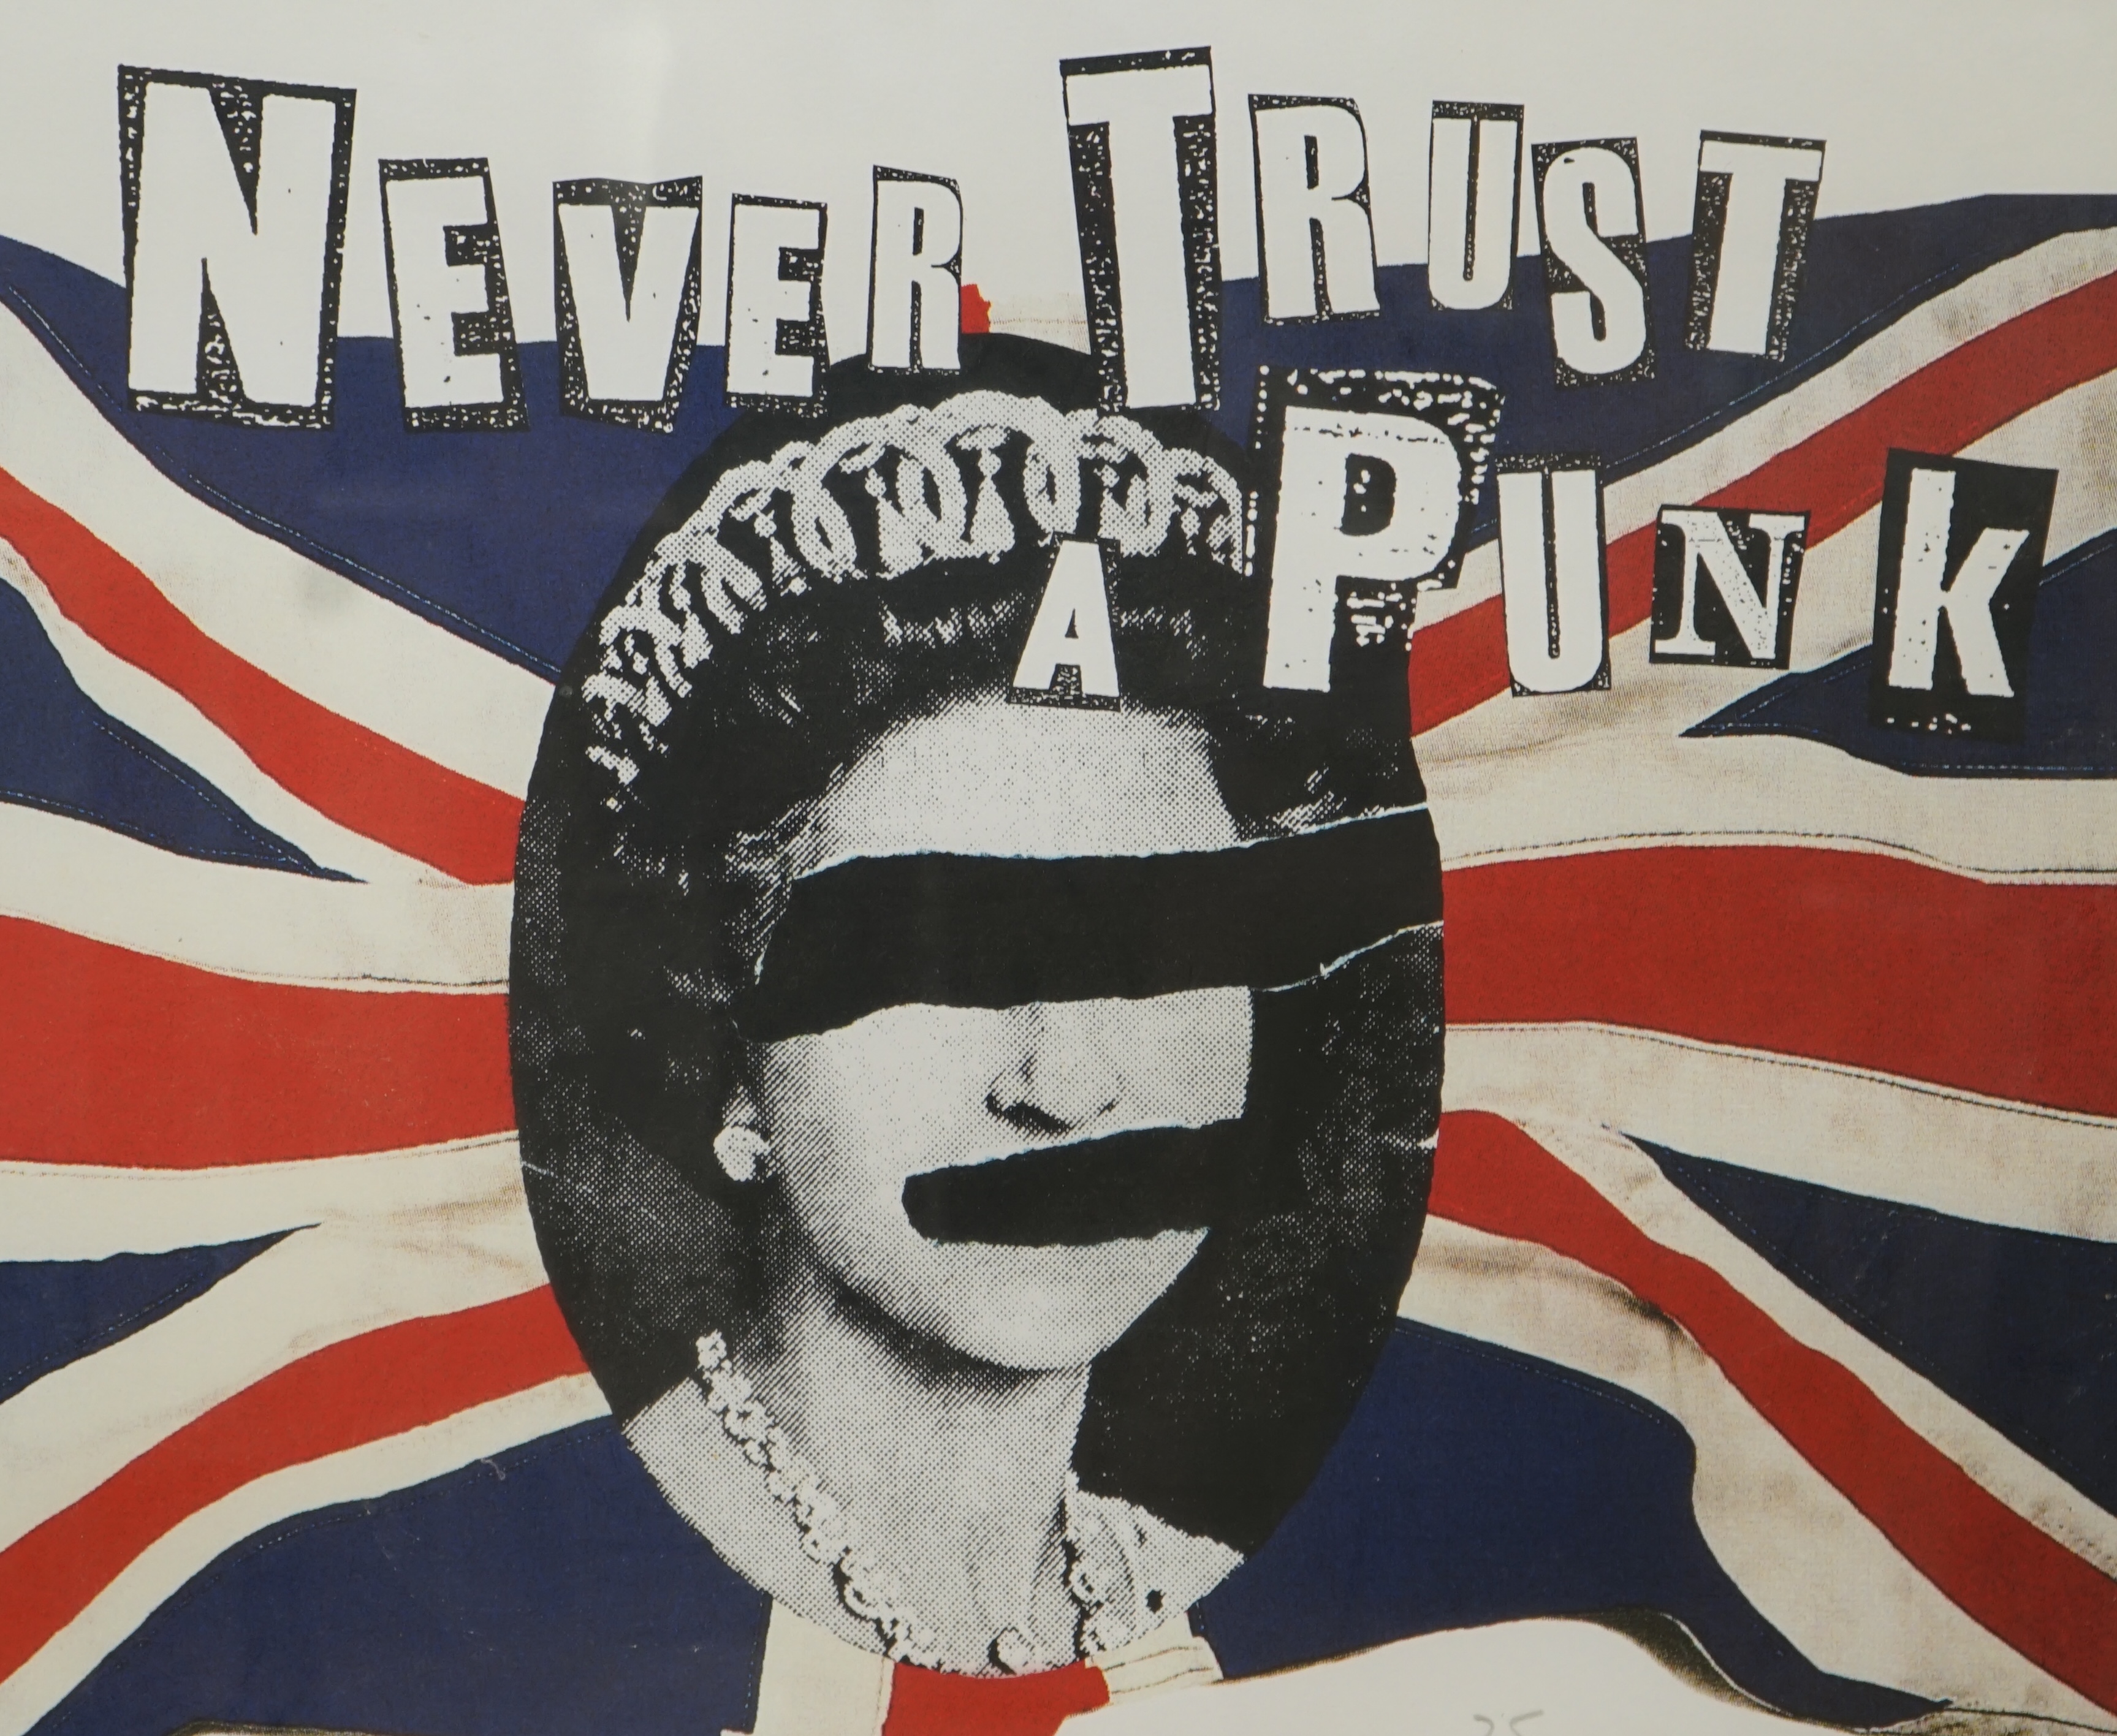 Jamie Reid (1947-2023), limited edition colour giclée print, ‘God Save the Queen - Never Trust a Punk’, in the style of The Sex Pistols album cover, signed in pencil, edition 25/100, 59.5 x 79.5cm. Condition - fair to go